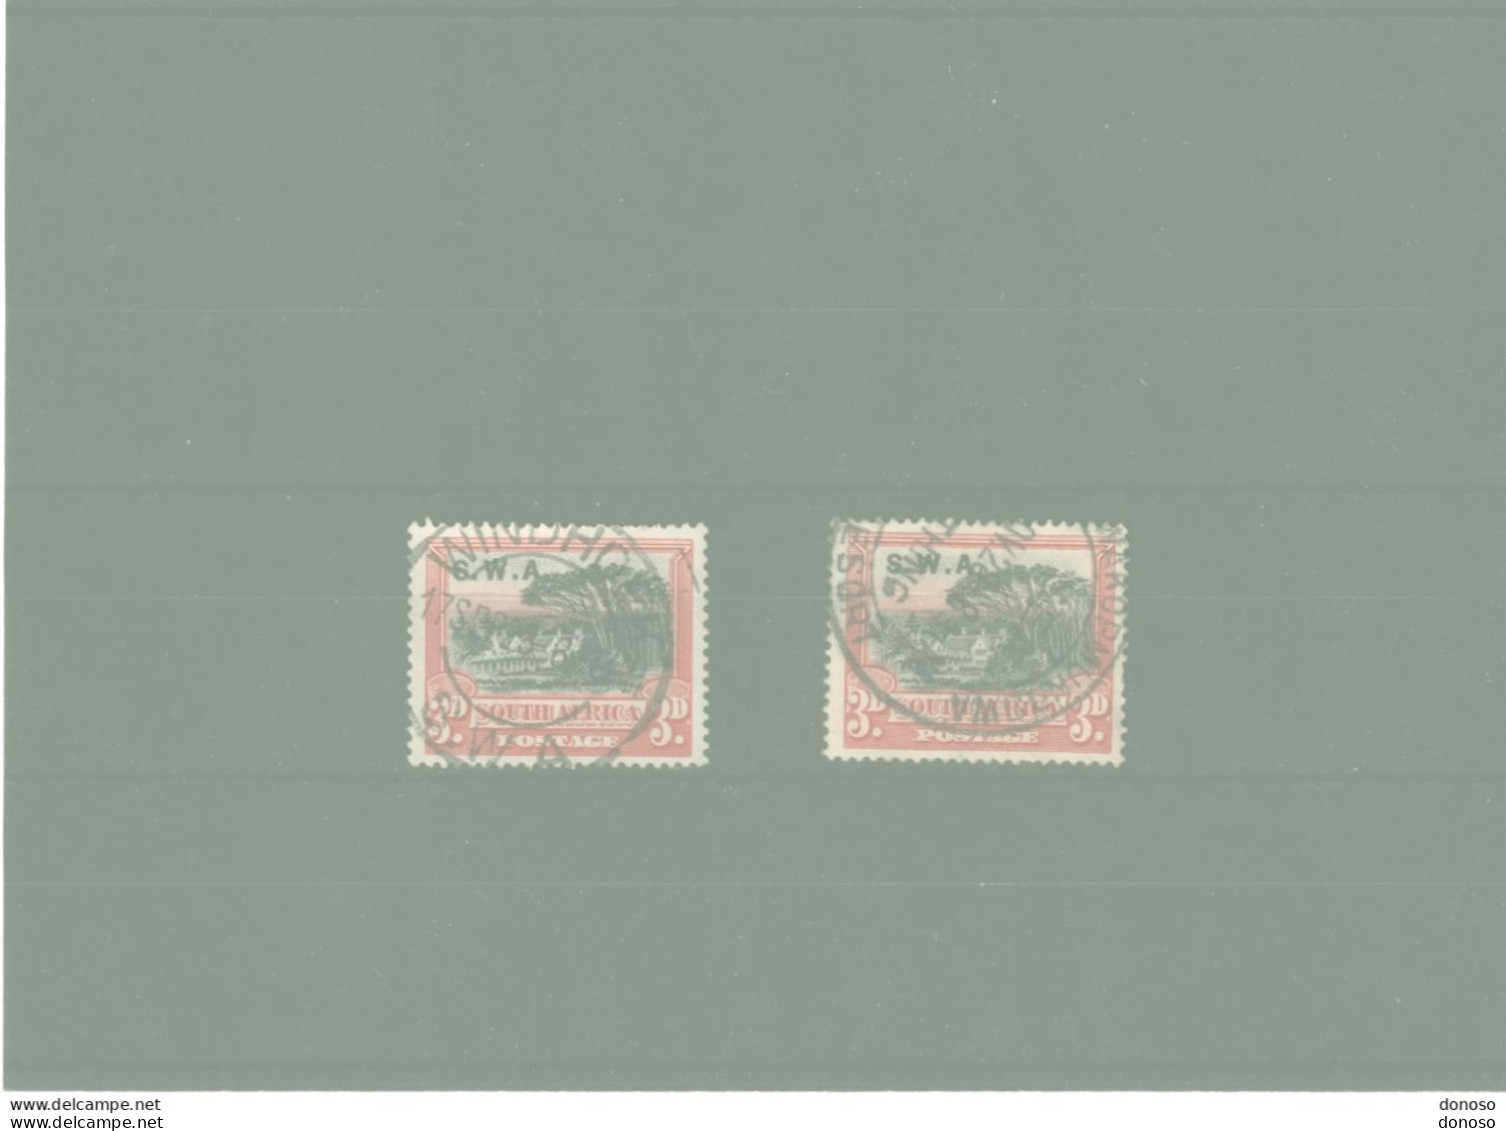 SWA SUD OUEST AFRICAIN 1927 Yvert  87 + 96 Oblitéré, Cote 4 Euros - South West Africa (1923-1990)